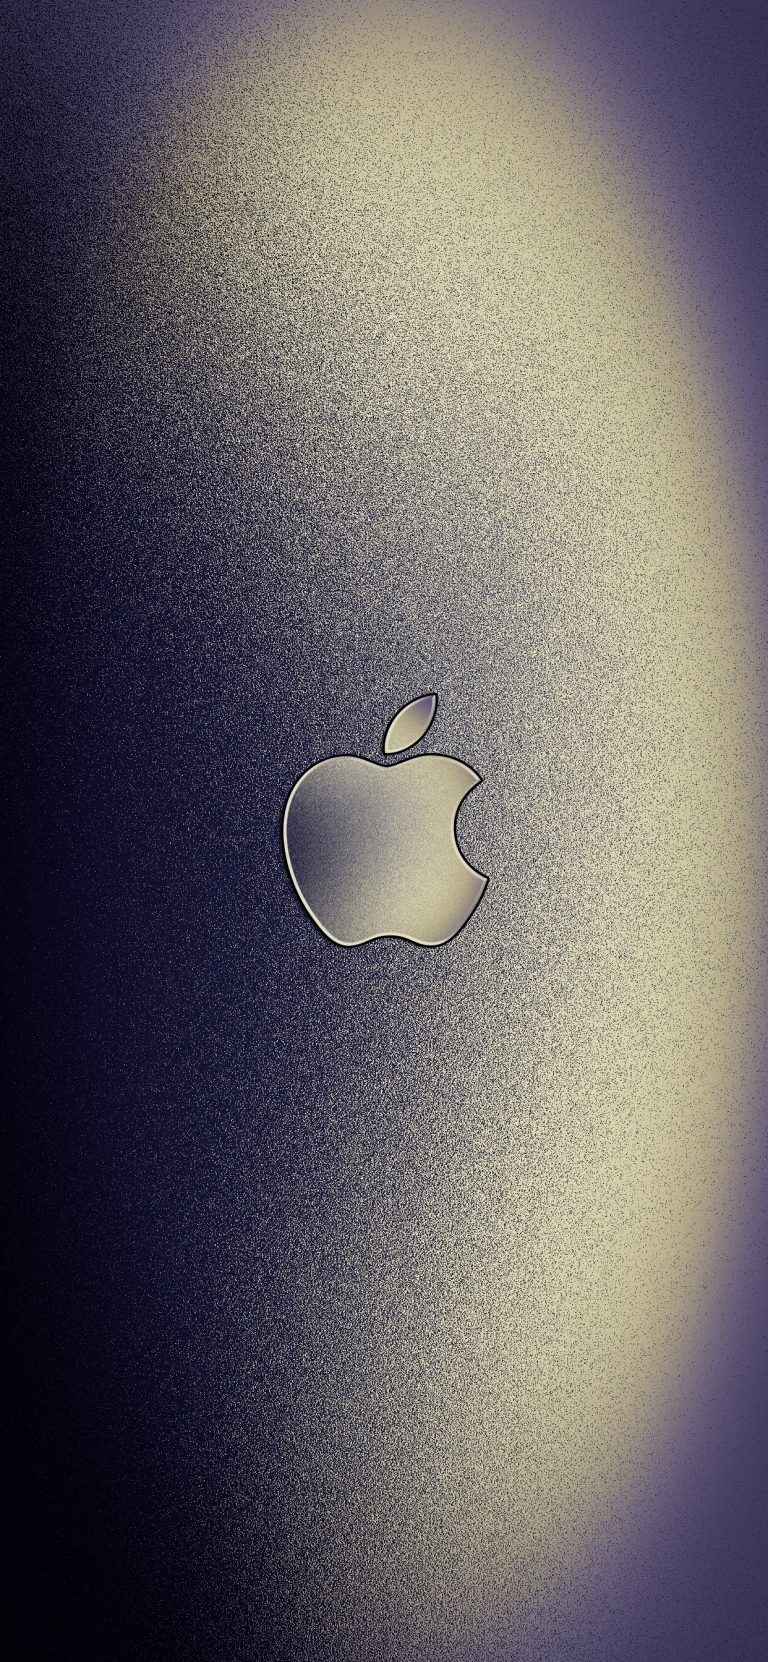 Aluminum Apple Logo Wallpapers for iPhone